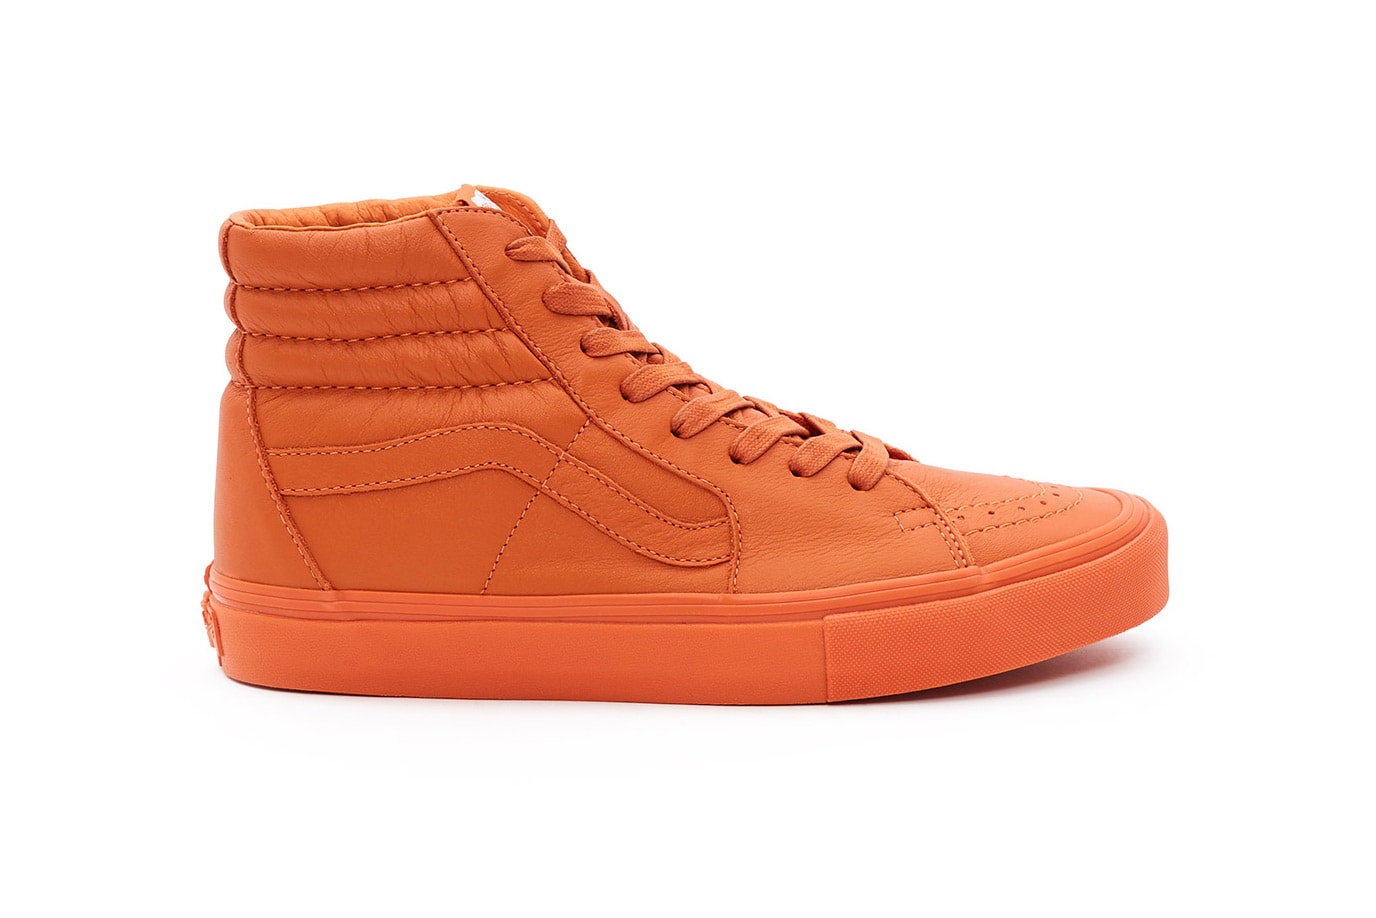 Opening Ceremony Vans Leather Mono Pack